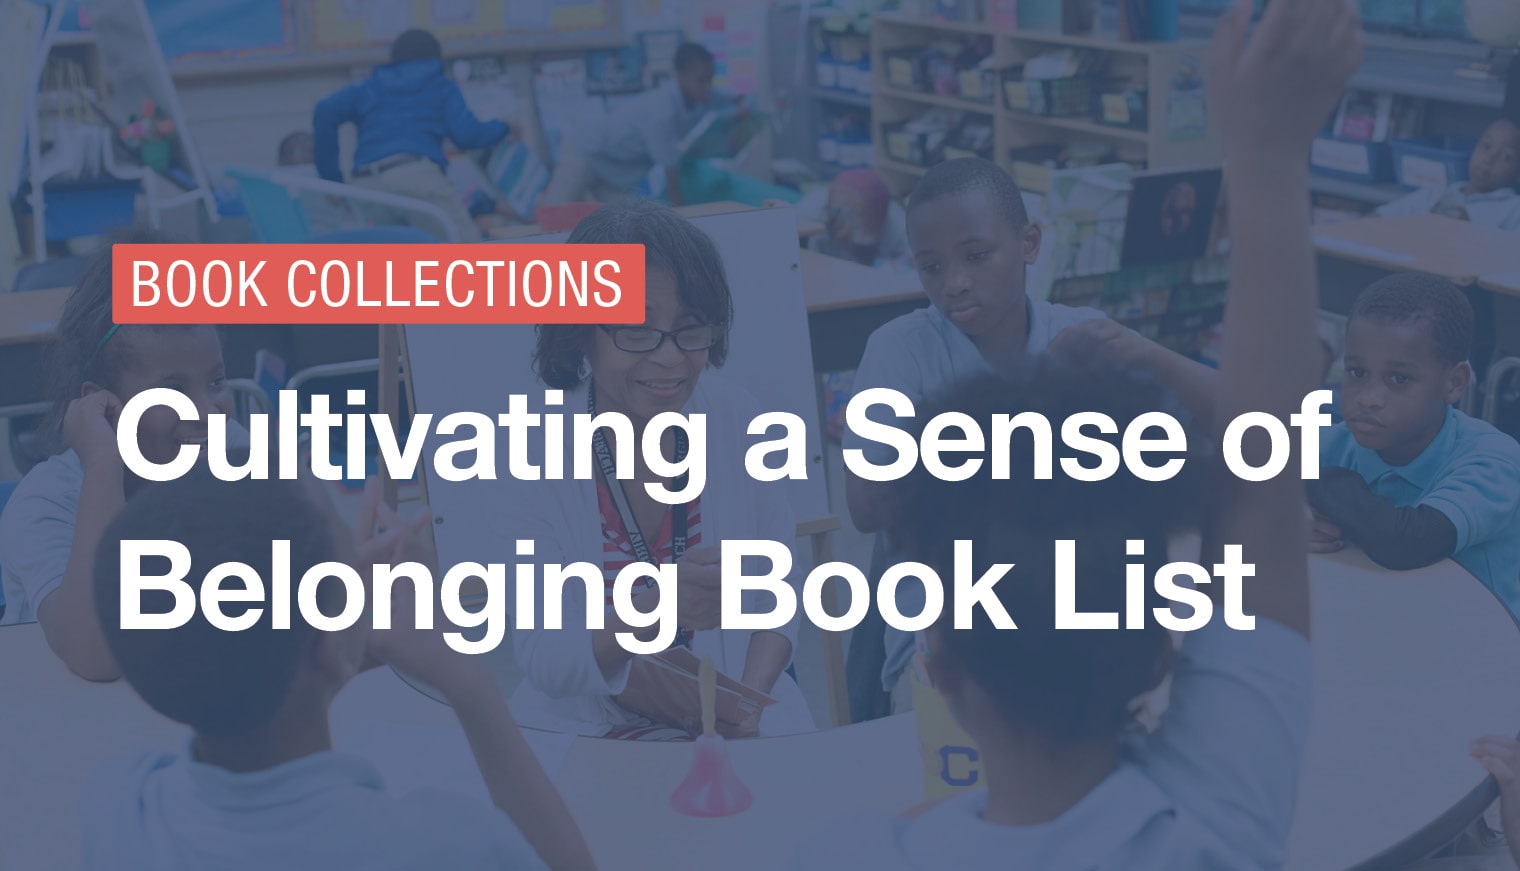 Featured image for “Cultivating a Sense of Belonging Book List”